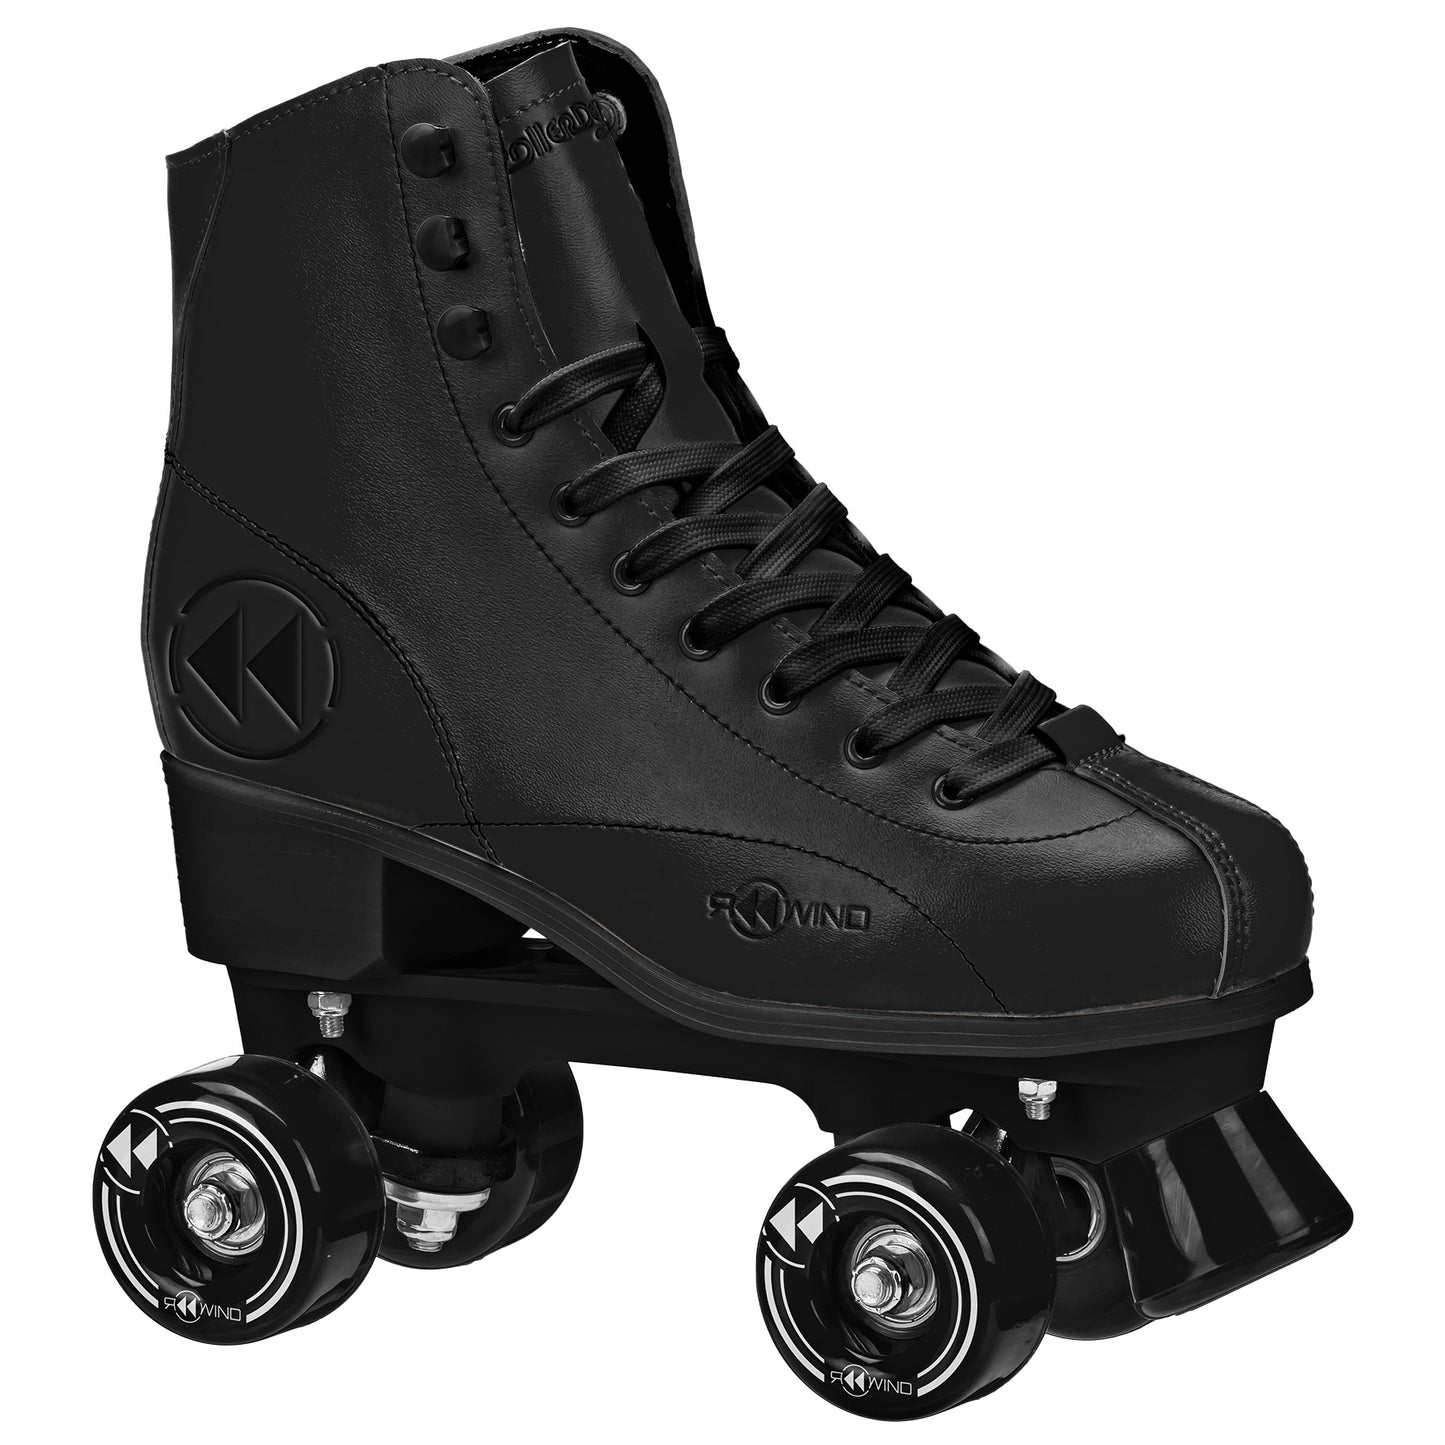 Reewind Classic Freestyle Men's Roller Skates